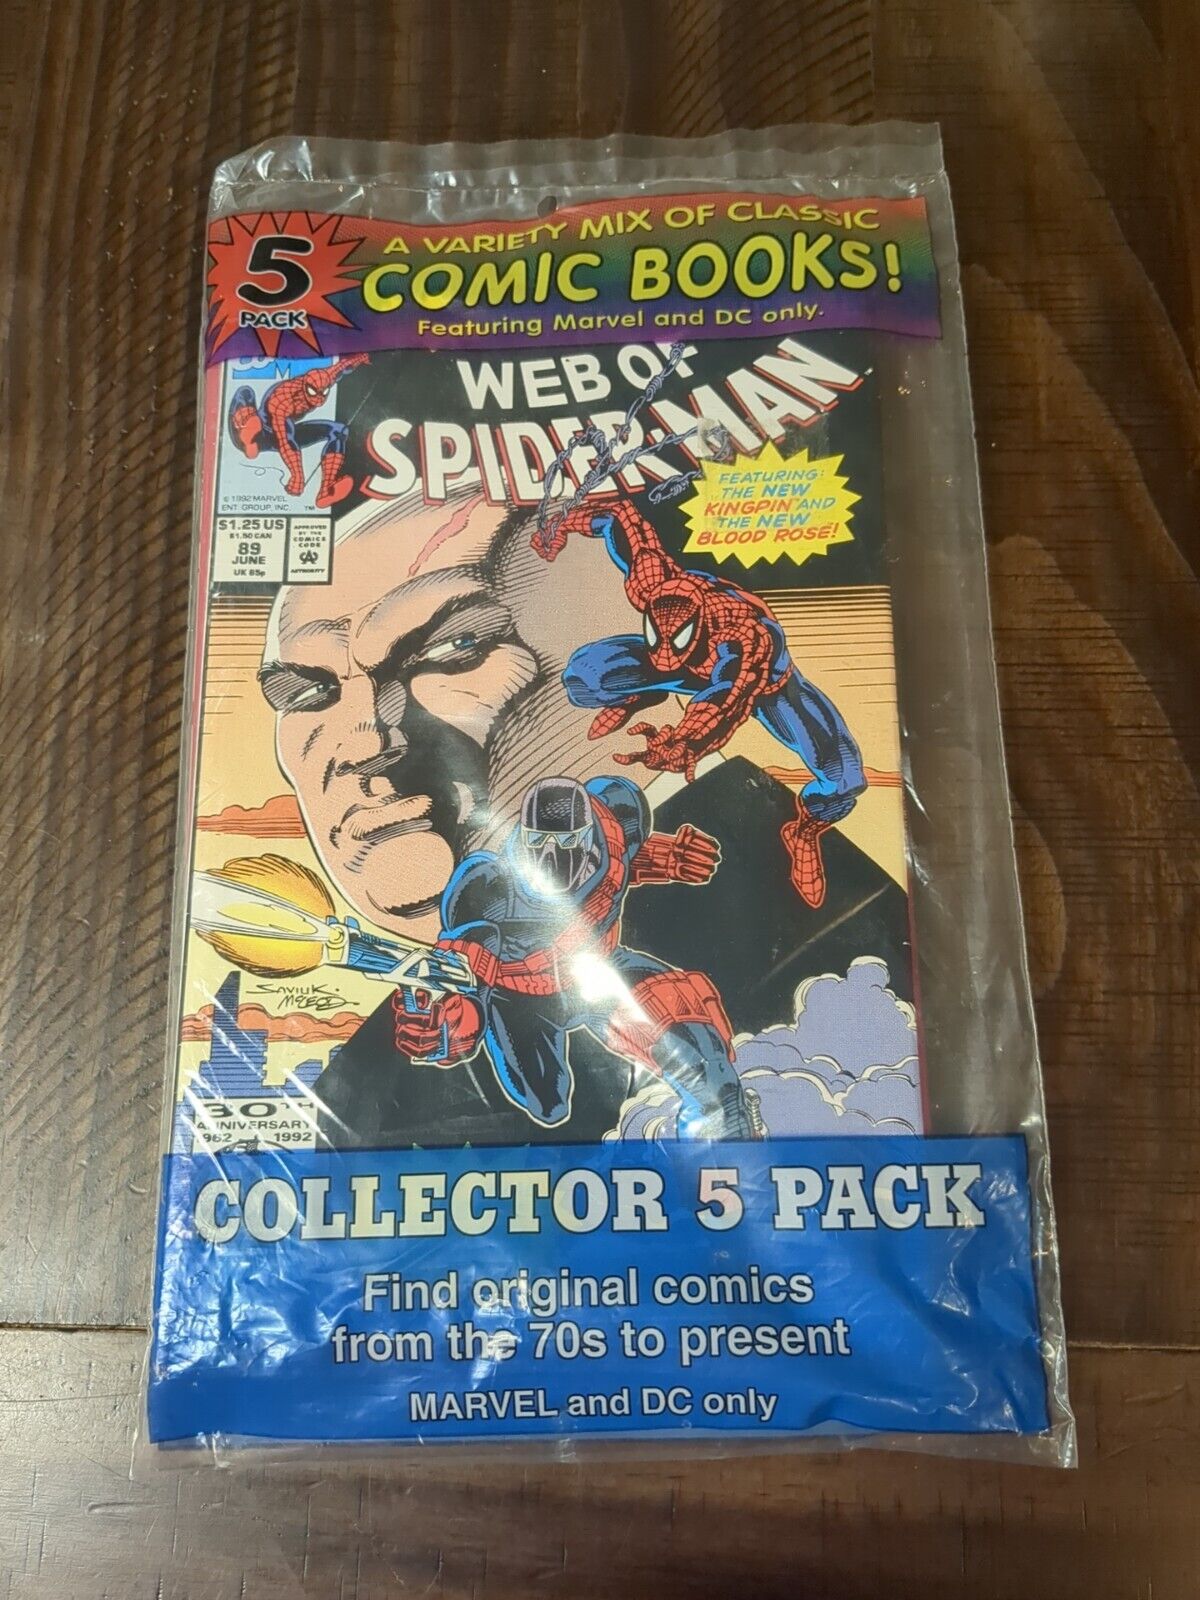 Comic Book 5 Pack A Variety Mix Of Classic Comics Marvel /DC Collector